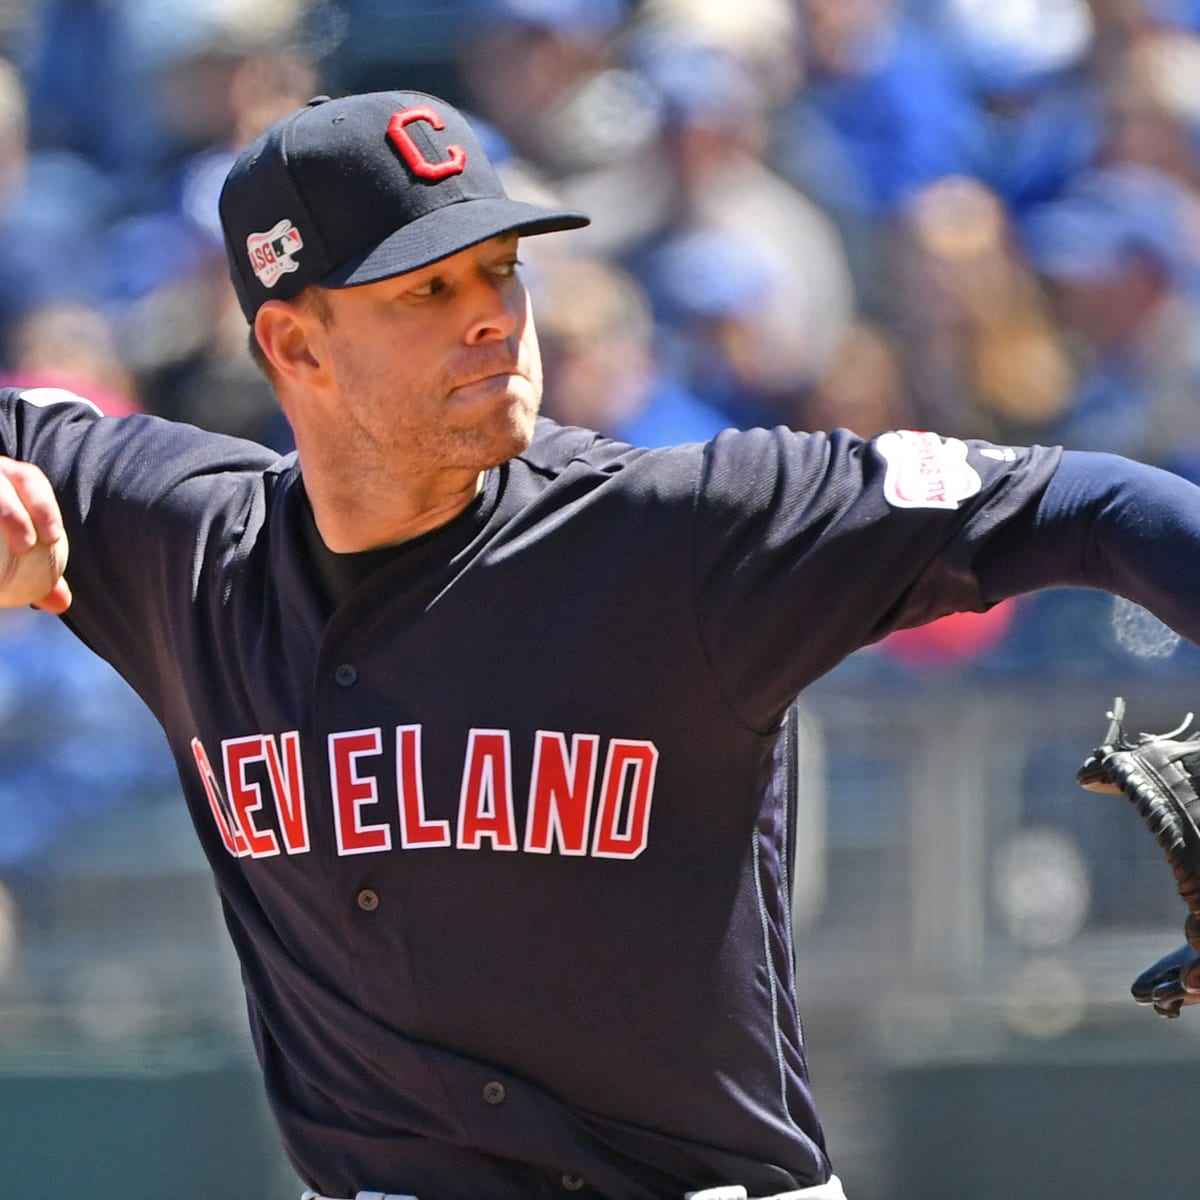 Rangers acquire two-time Cy Young winner Kluber from Cleveland